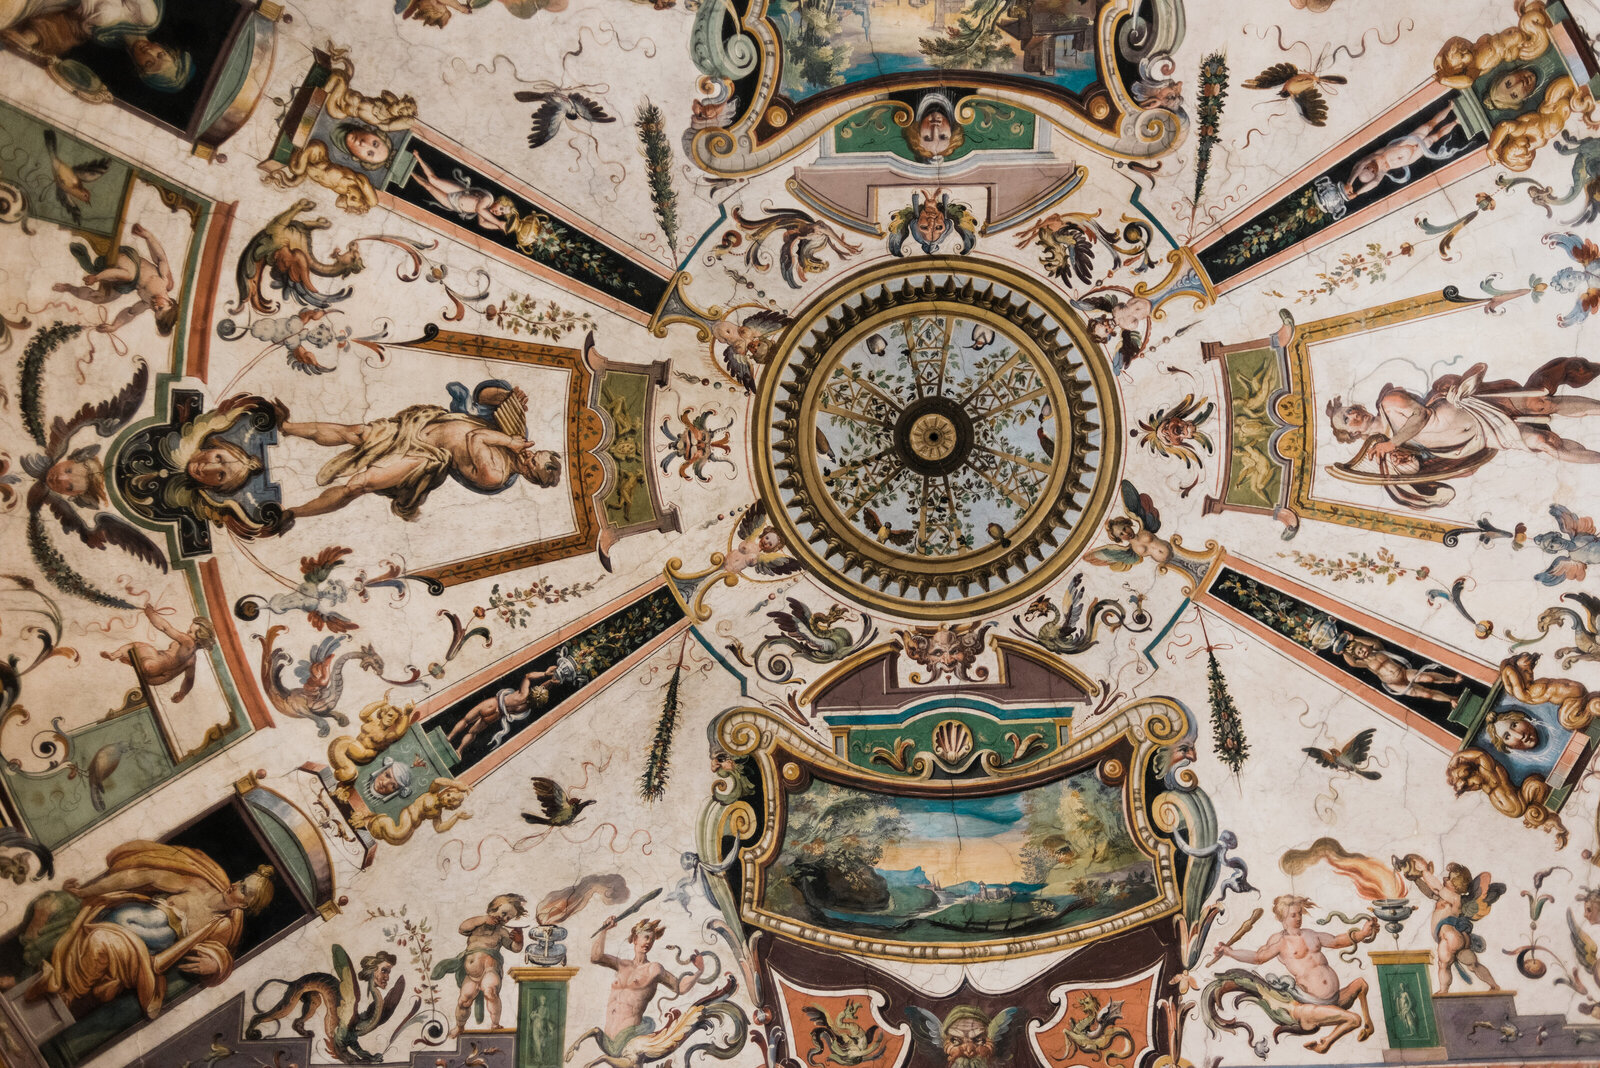 The ceiling of the Uffizi in Florence